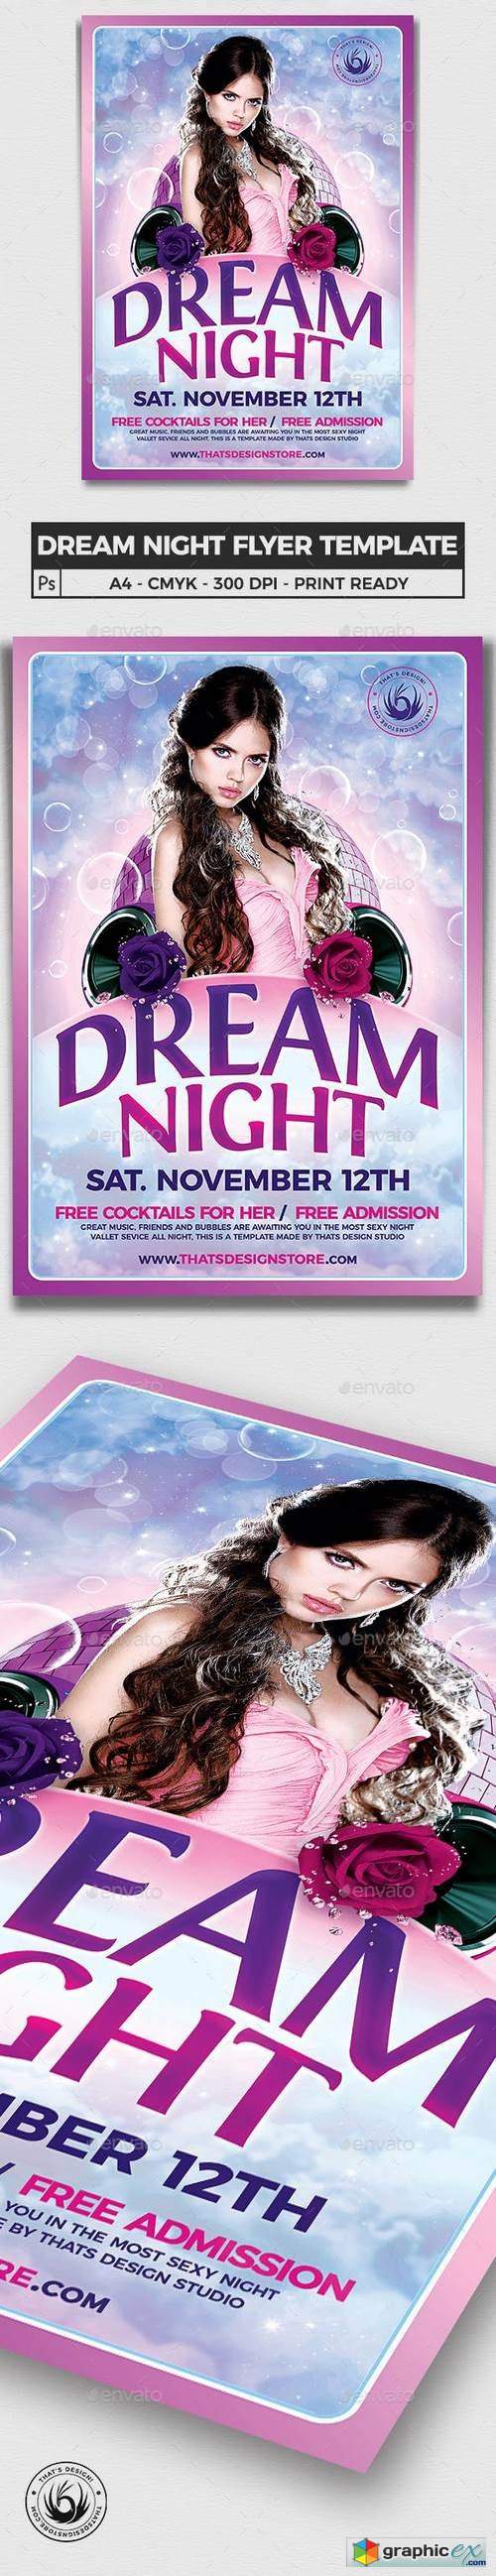 Dream Night Flyer Template - Updated !